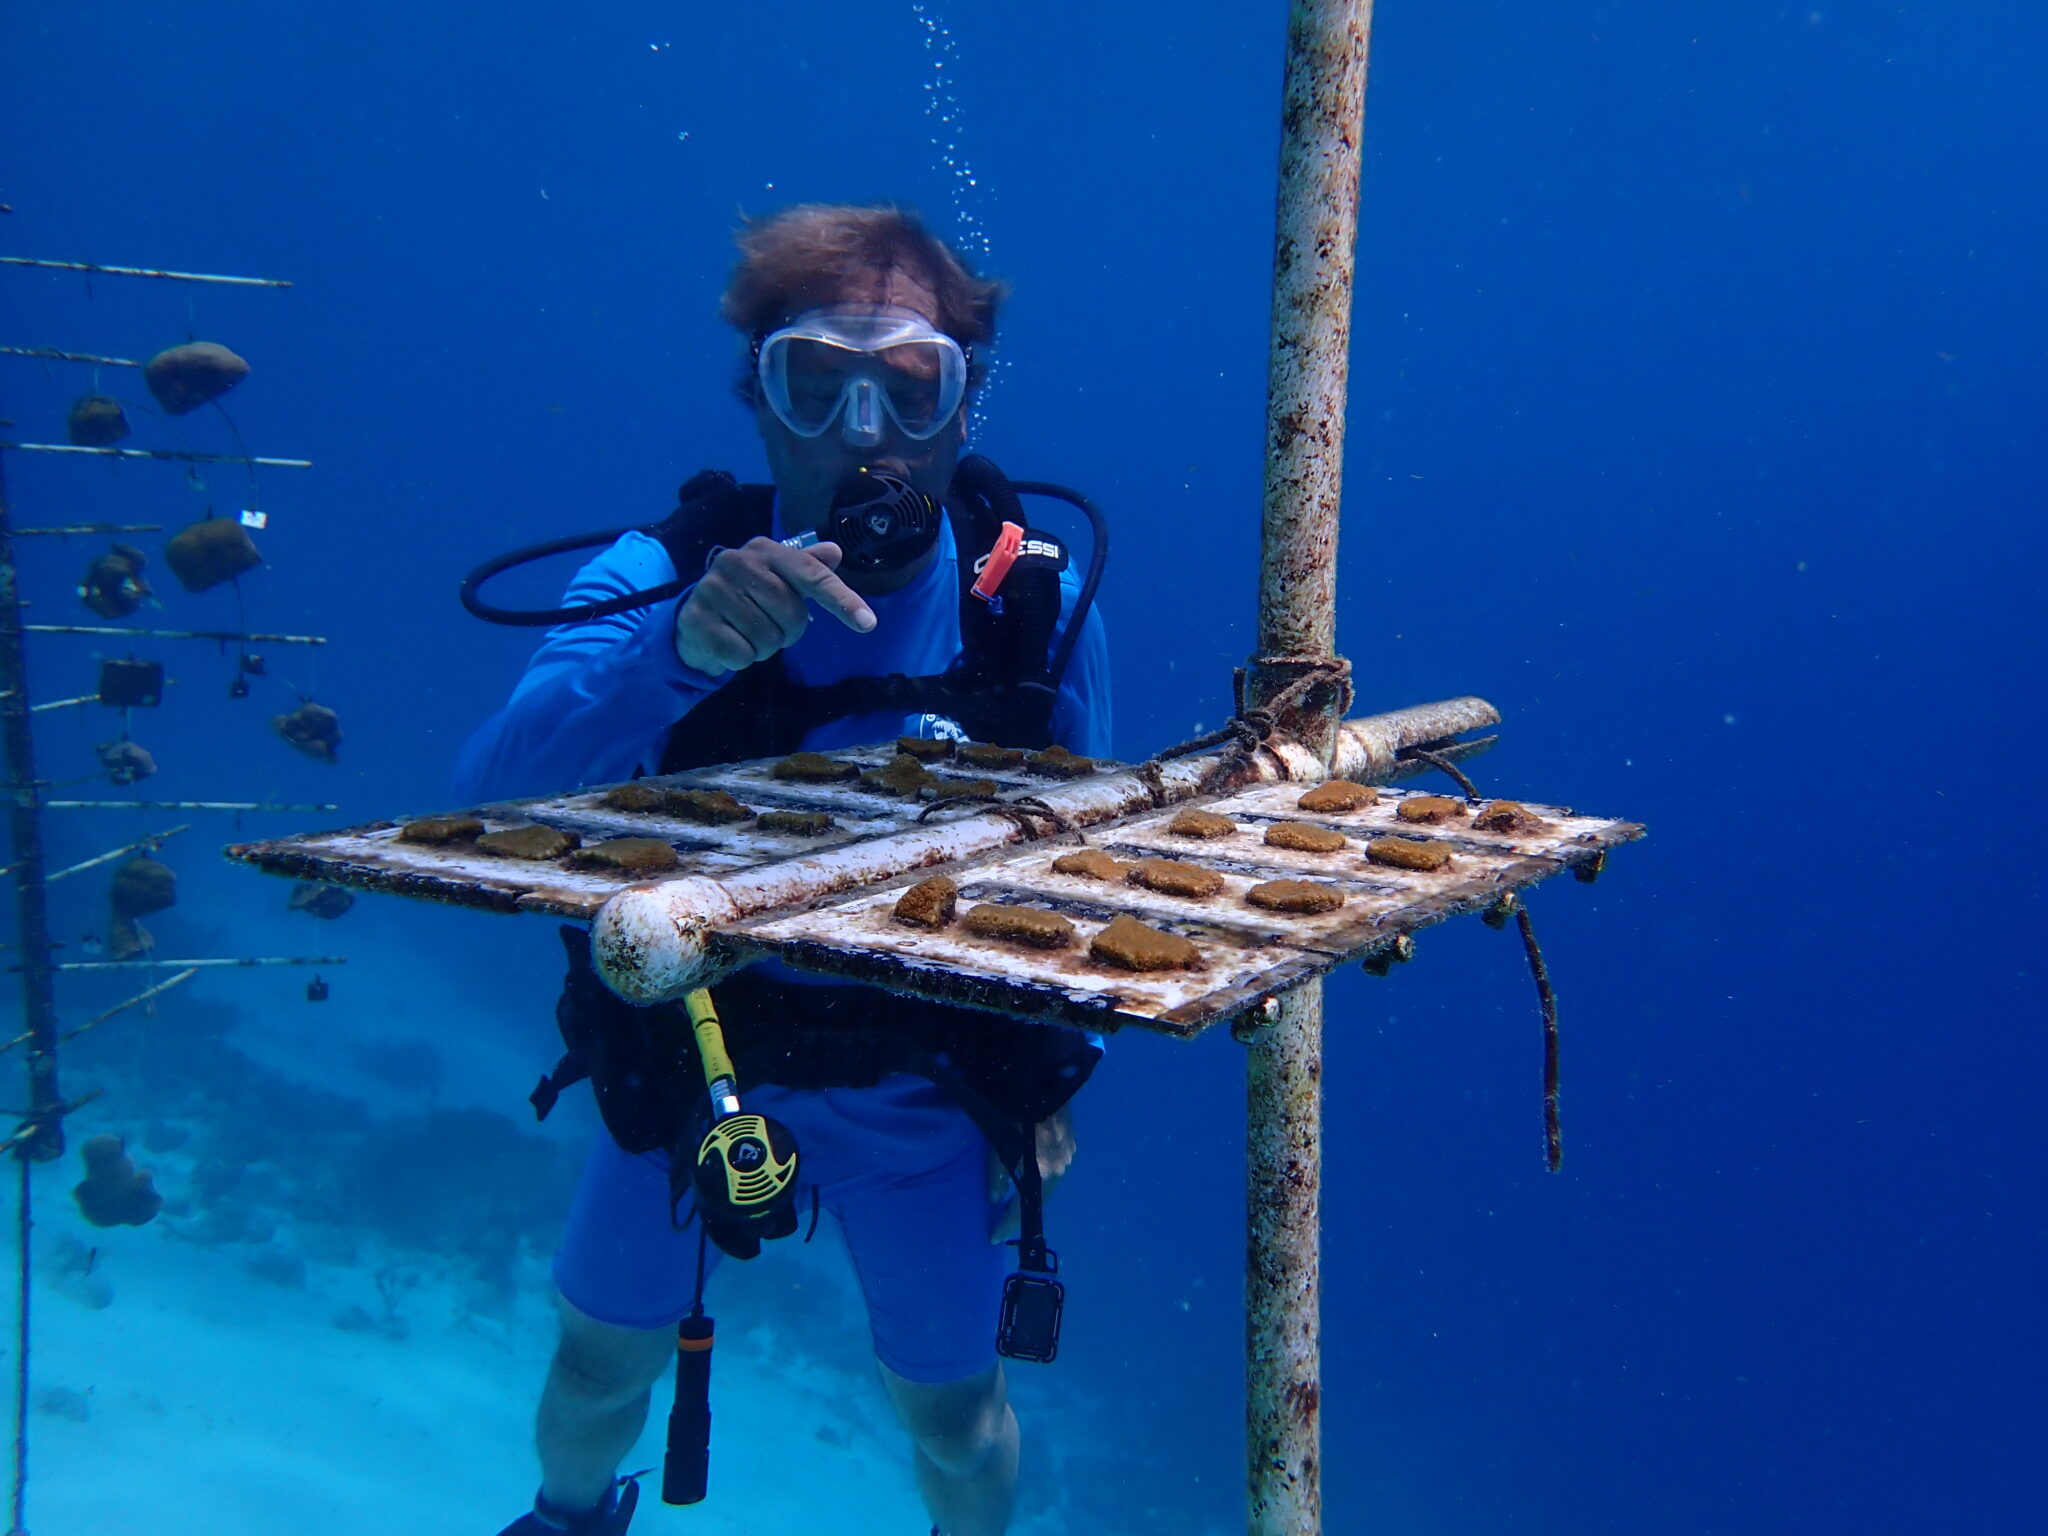 A person in scuba gear points to a flat structure with young coral growth on it